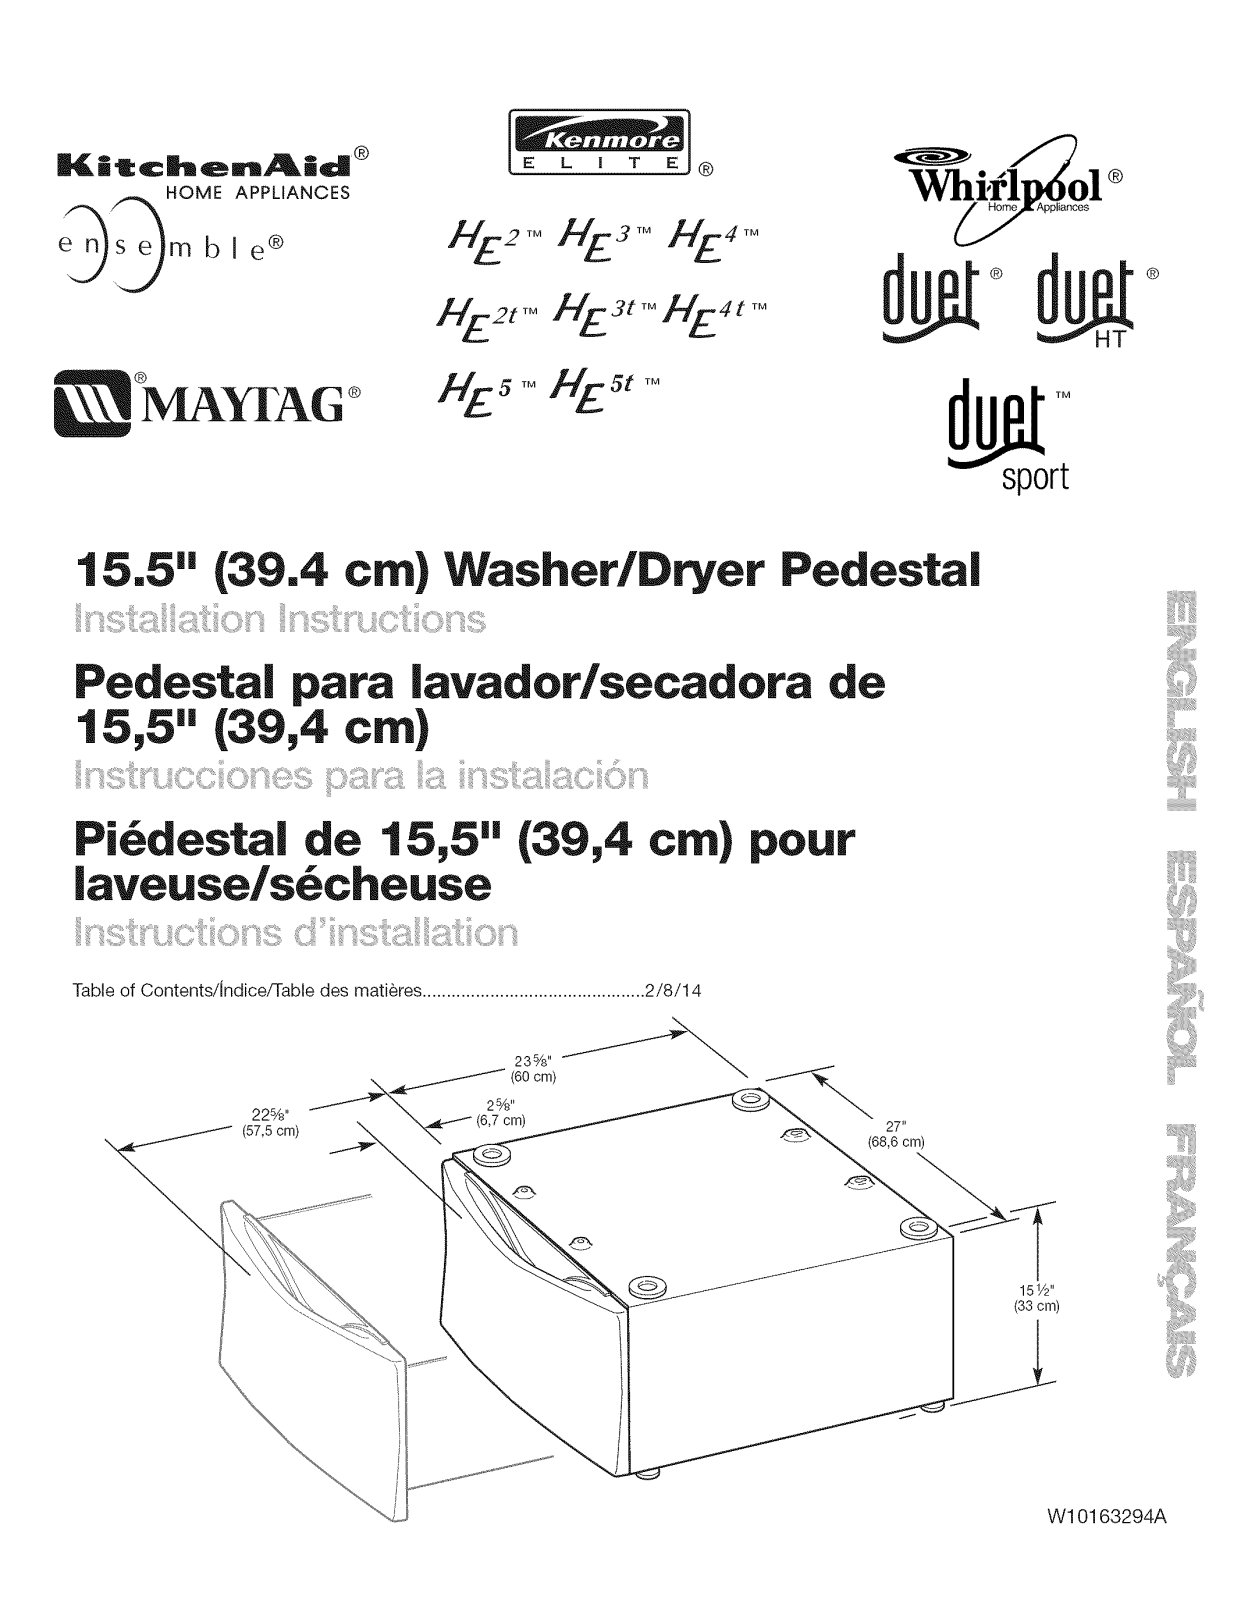 Maytag MHP1500SQ1, MHP1500SB1, MHP1500SK1, WHP1500SU1, WHP1500ST1 Installation Guide